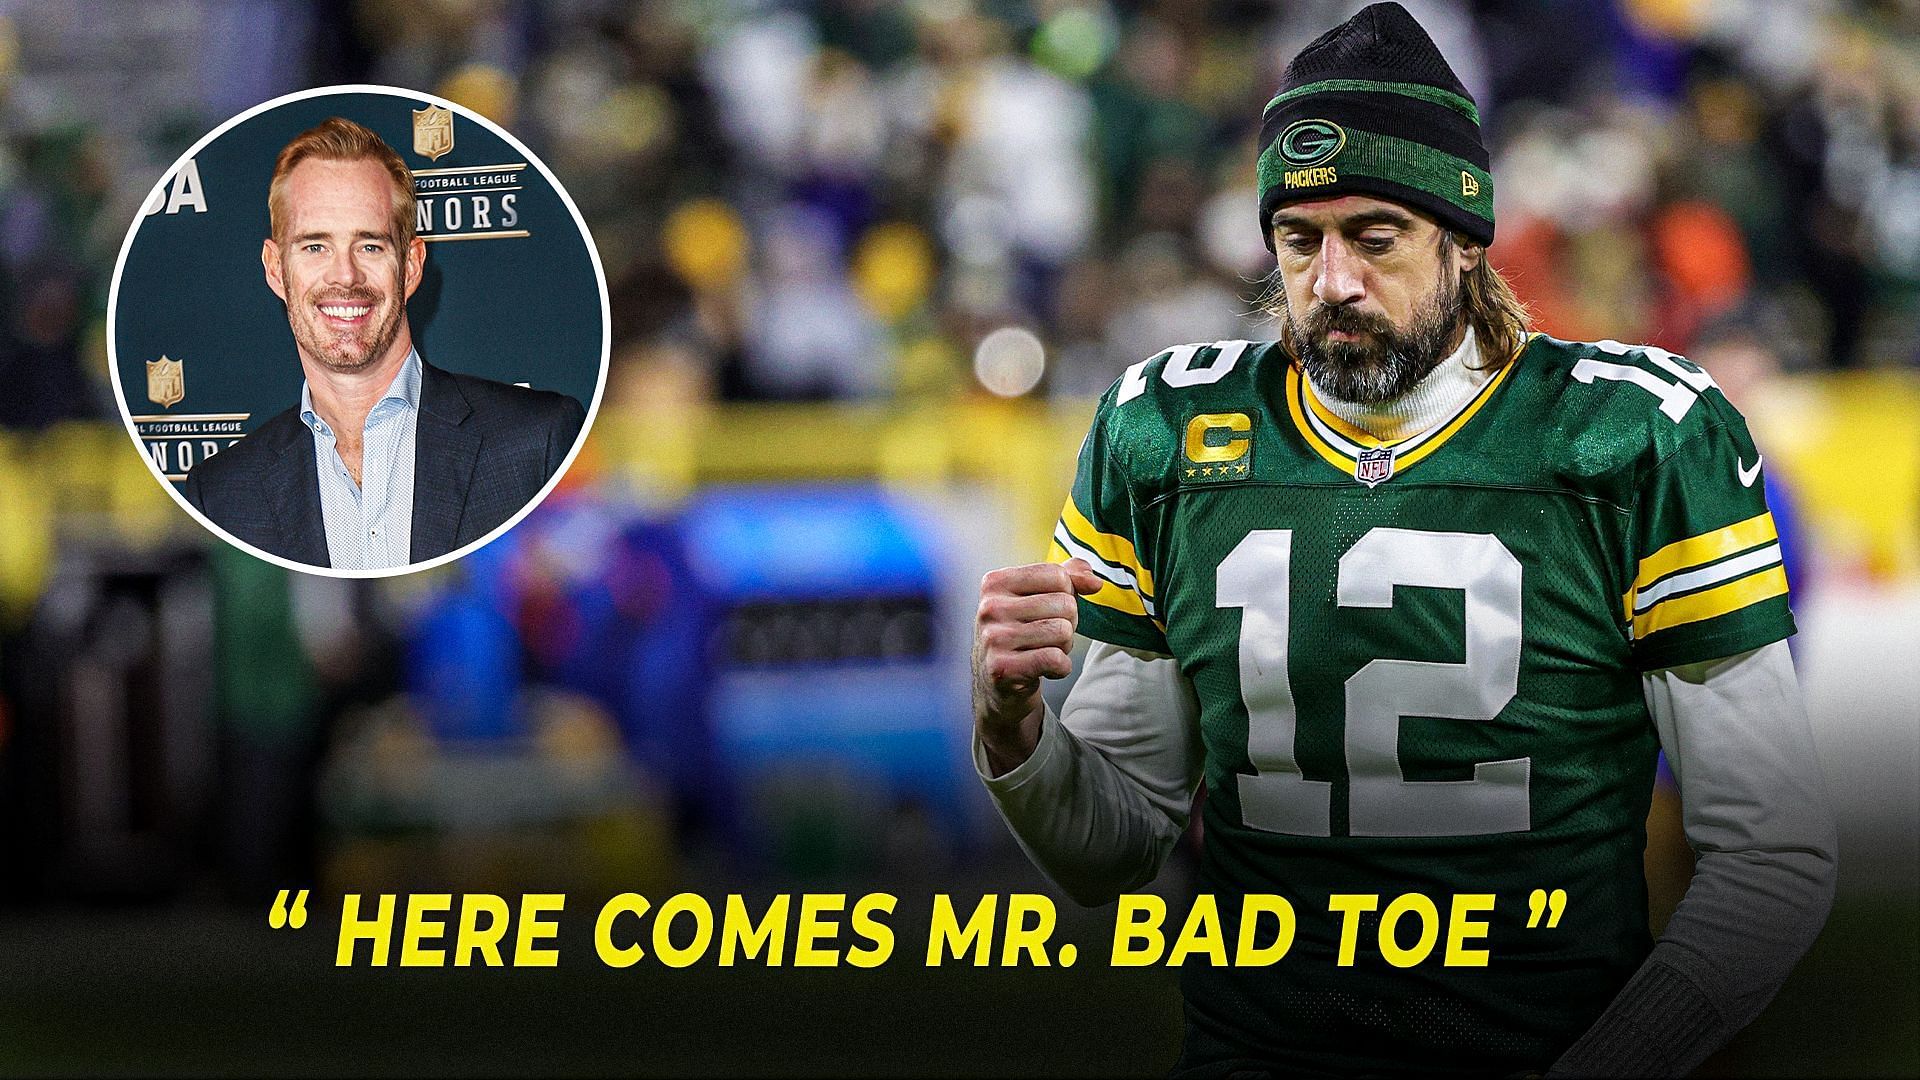 Joe Buck took a light-hearted jab at Aaron Rodgers during the Packers vs. Rams game